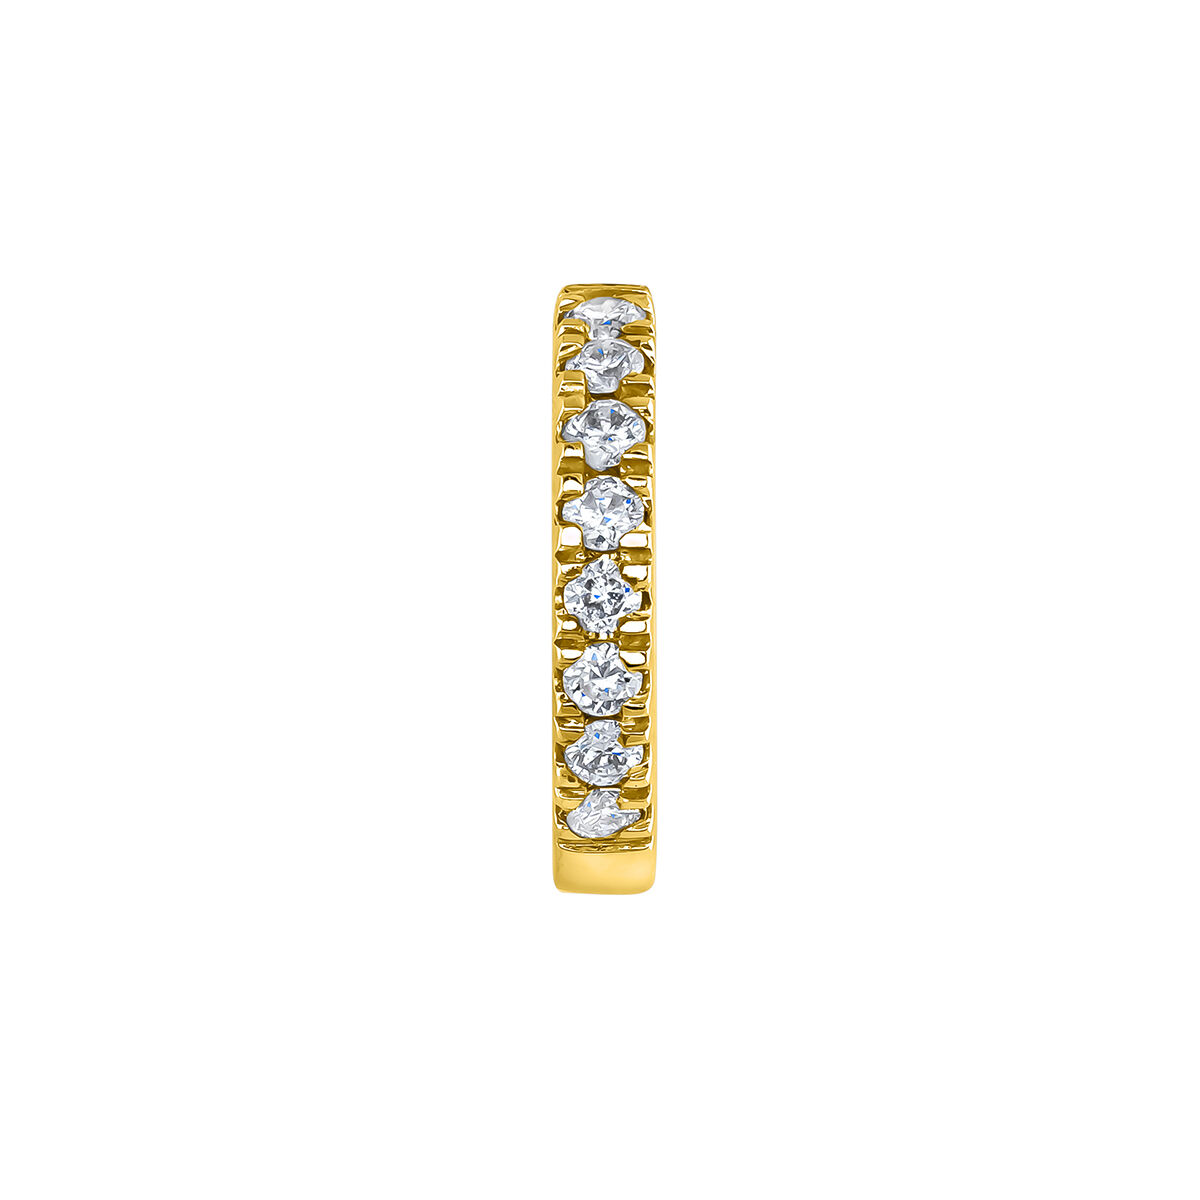 Single small hoop earring in 18k yellow gold with 0.032ct diamonds, J04152-02-H, hi-res